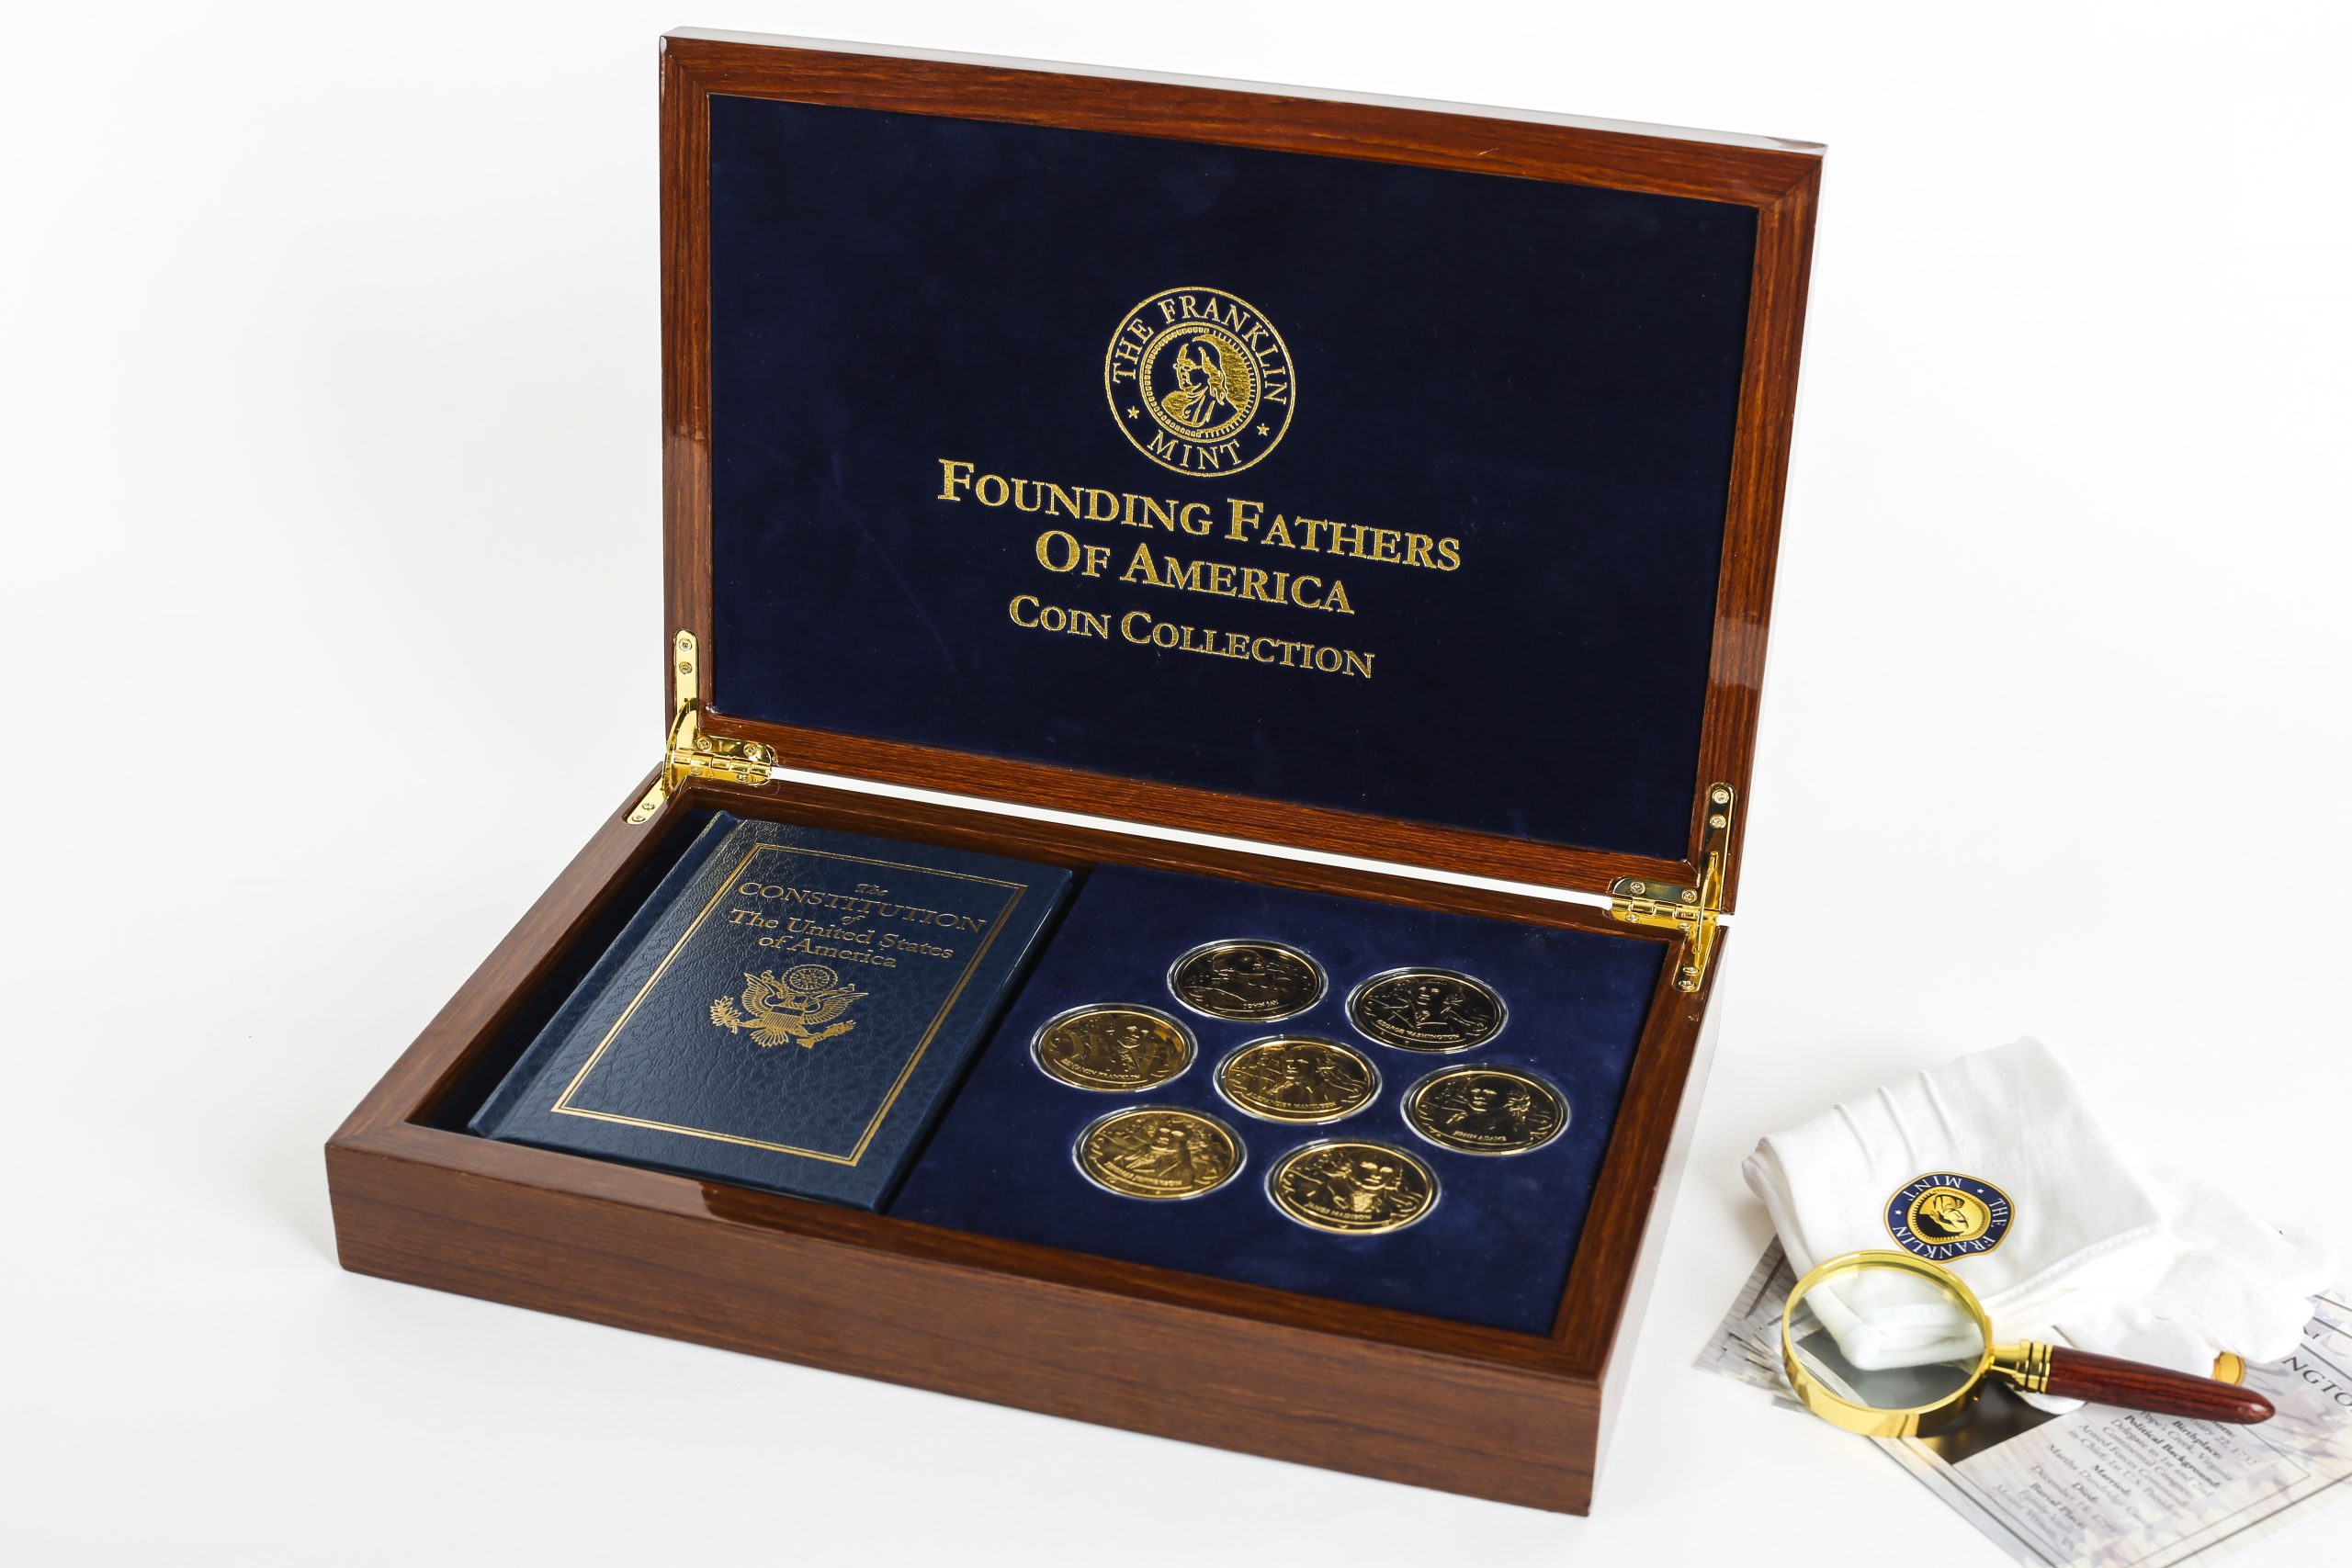 Founding Fathers of America Coin Collection box